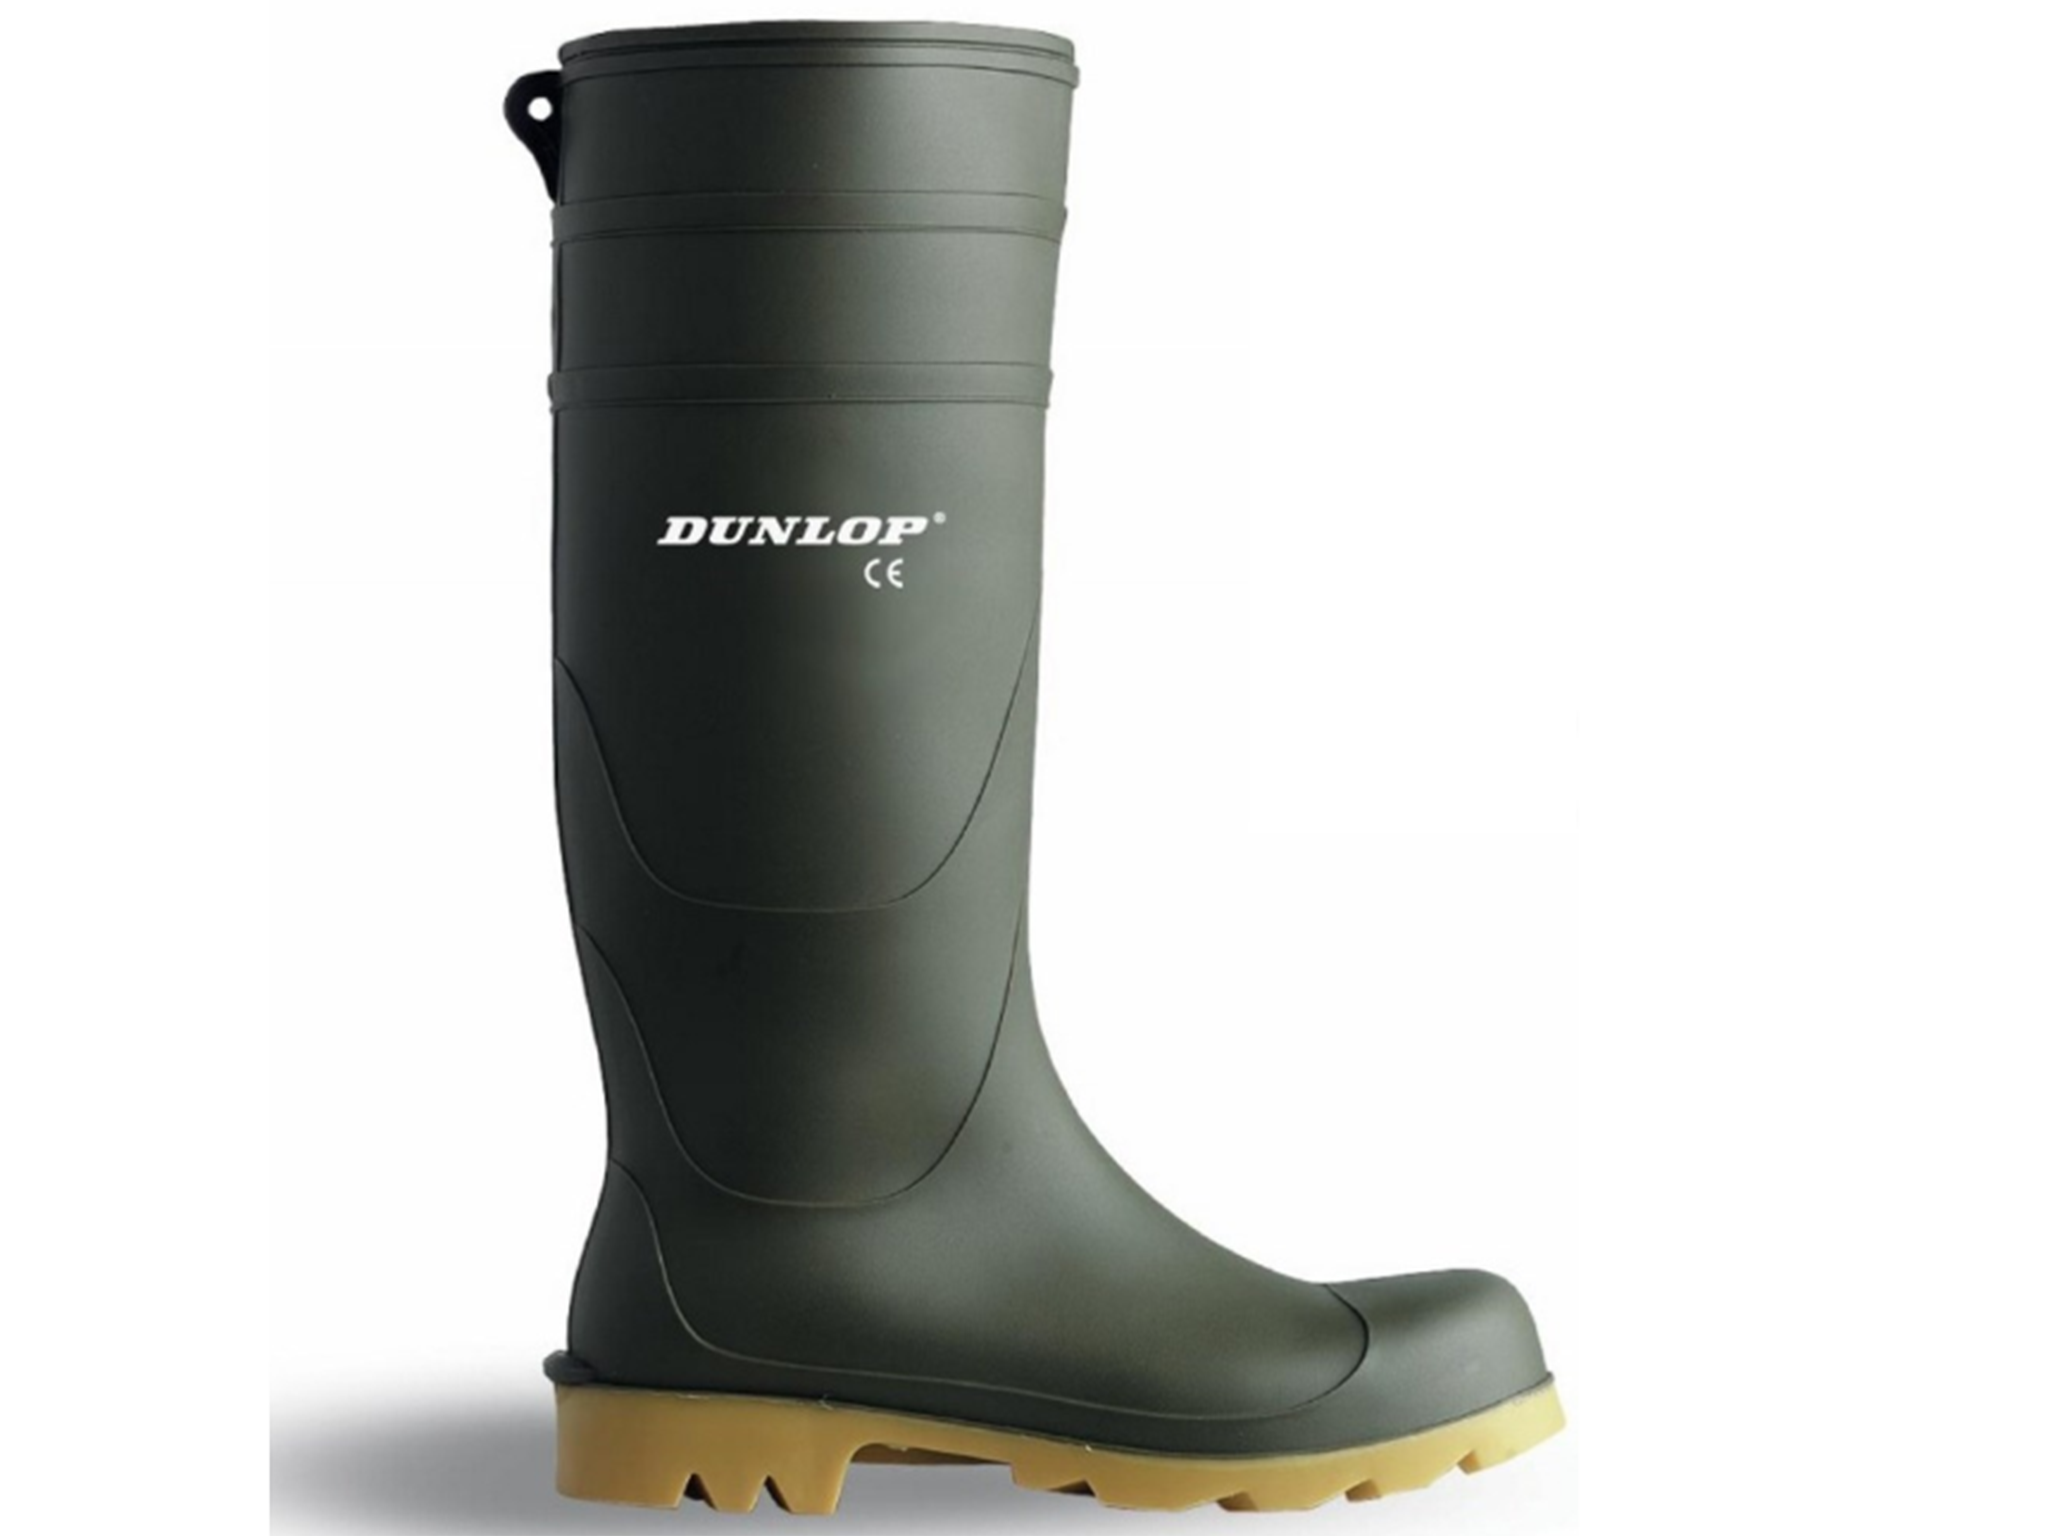 Best festival wellies that are 